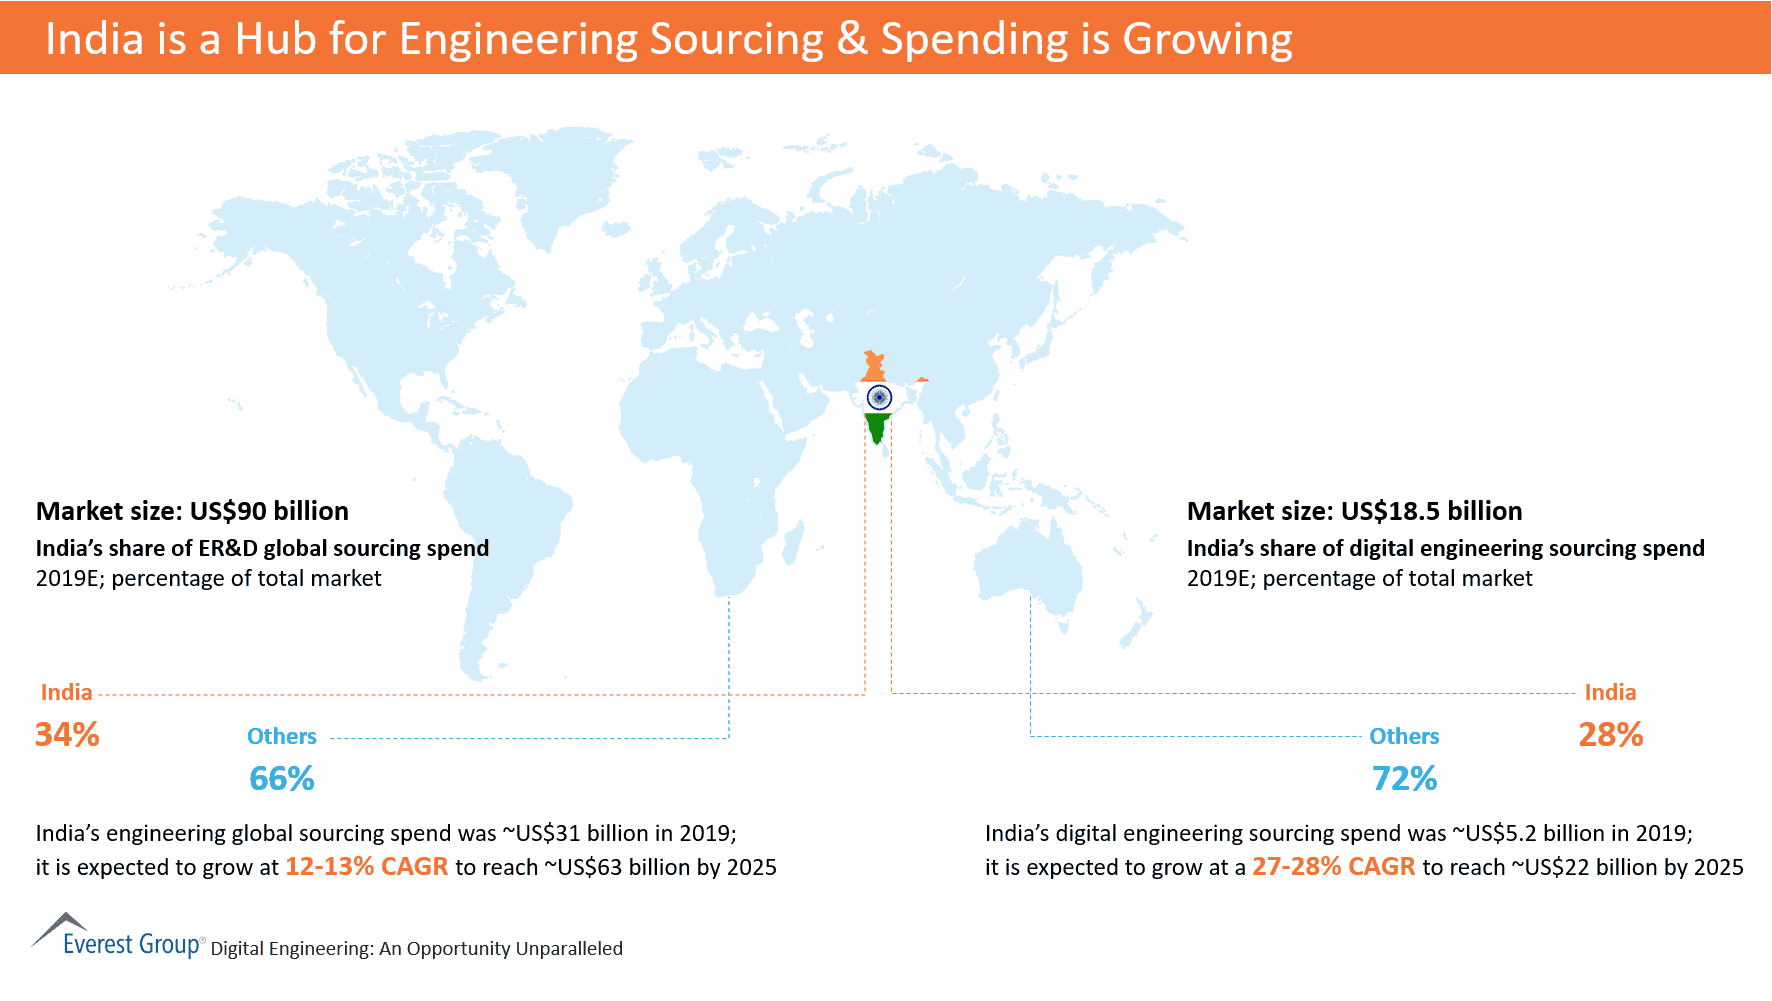 India is a Hub for Engineering Sourcing & Spending is Growing